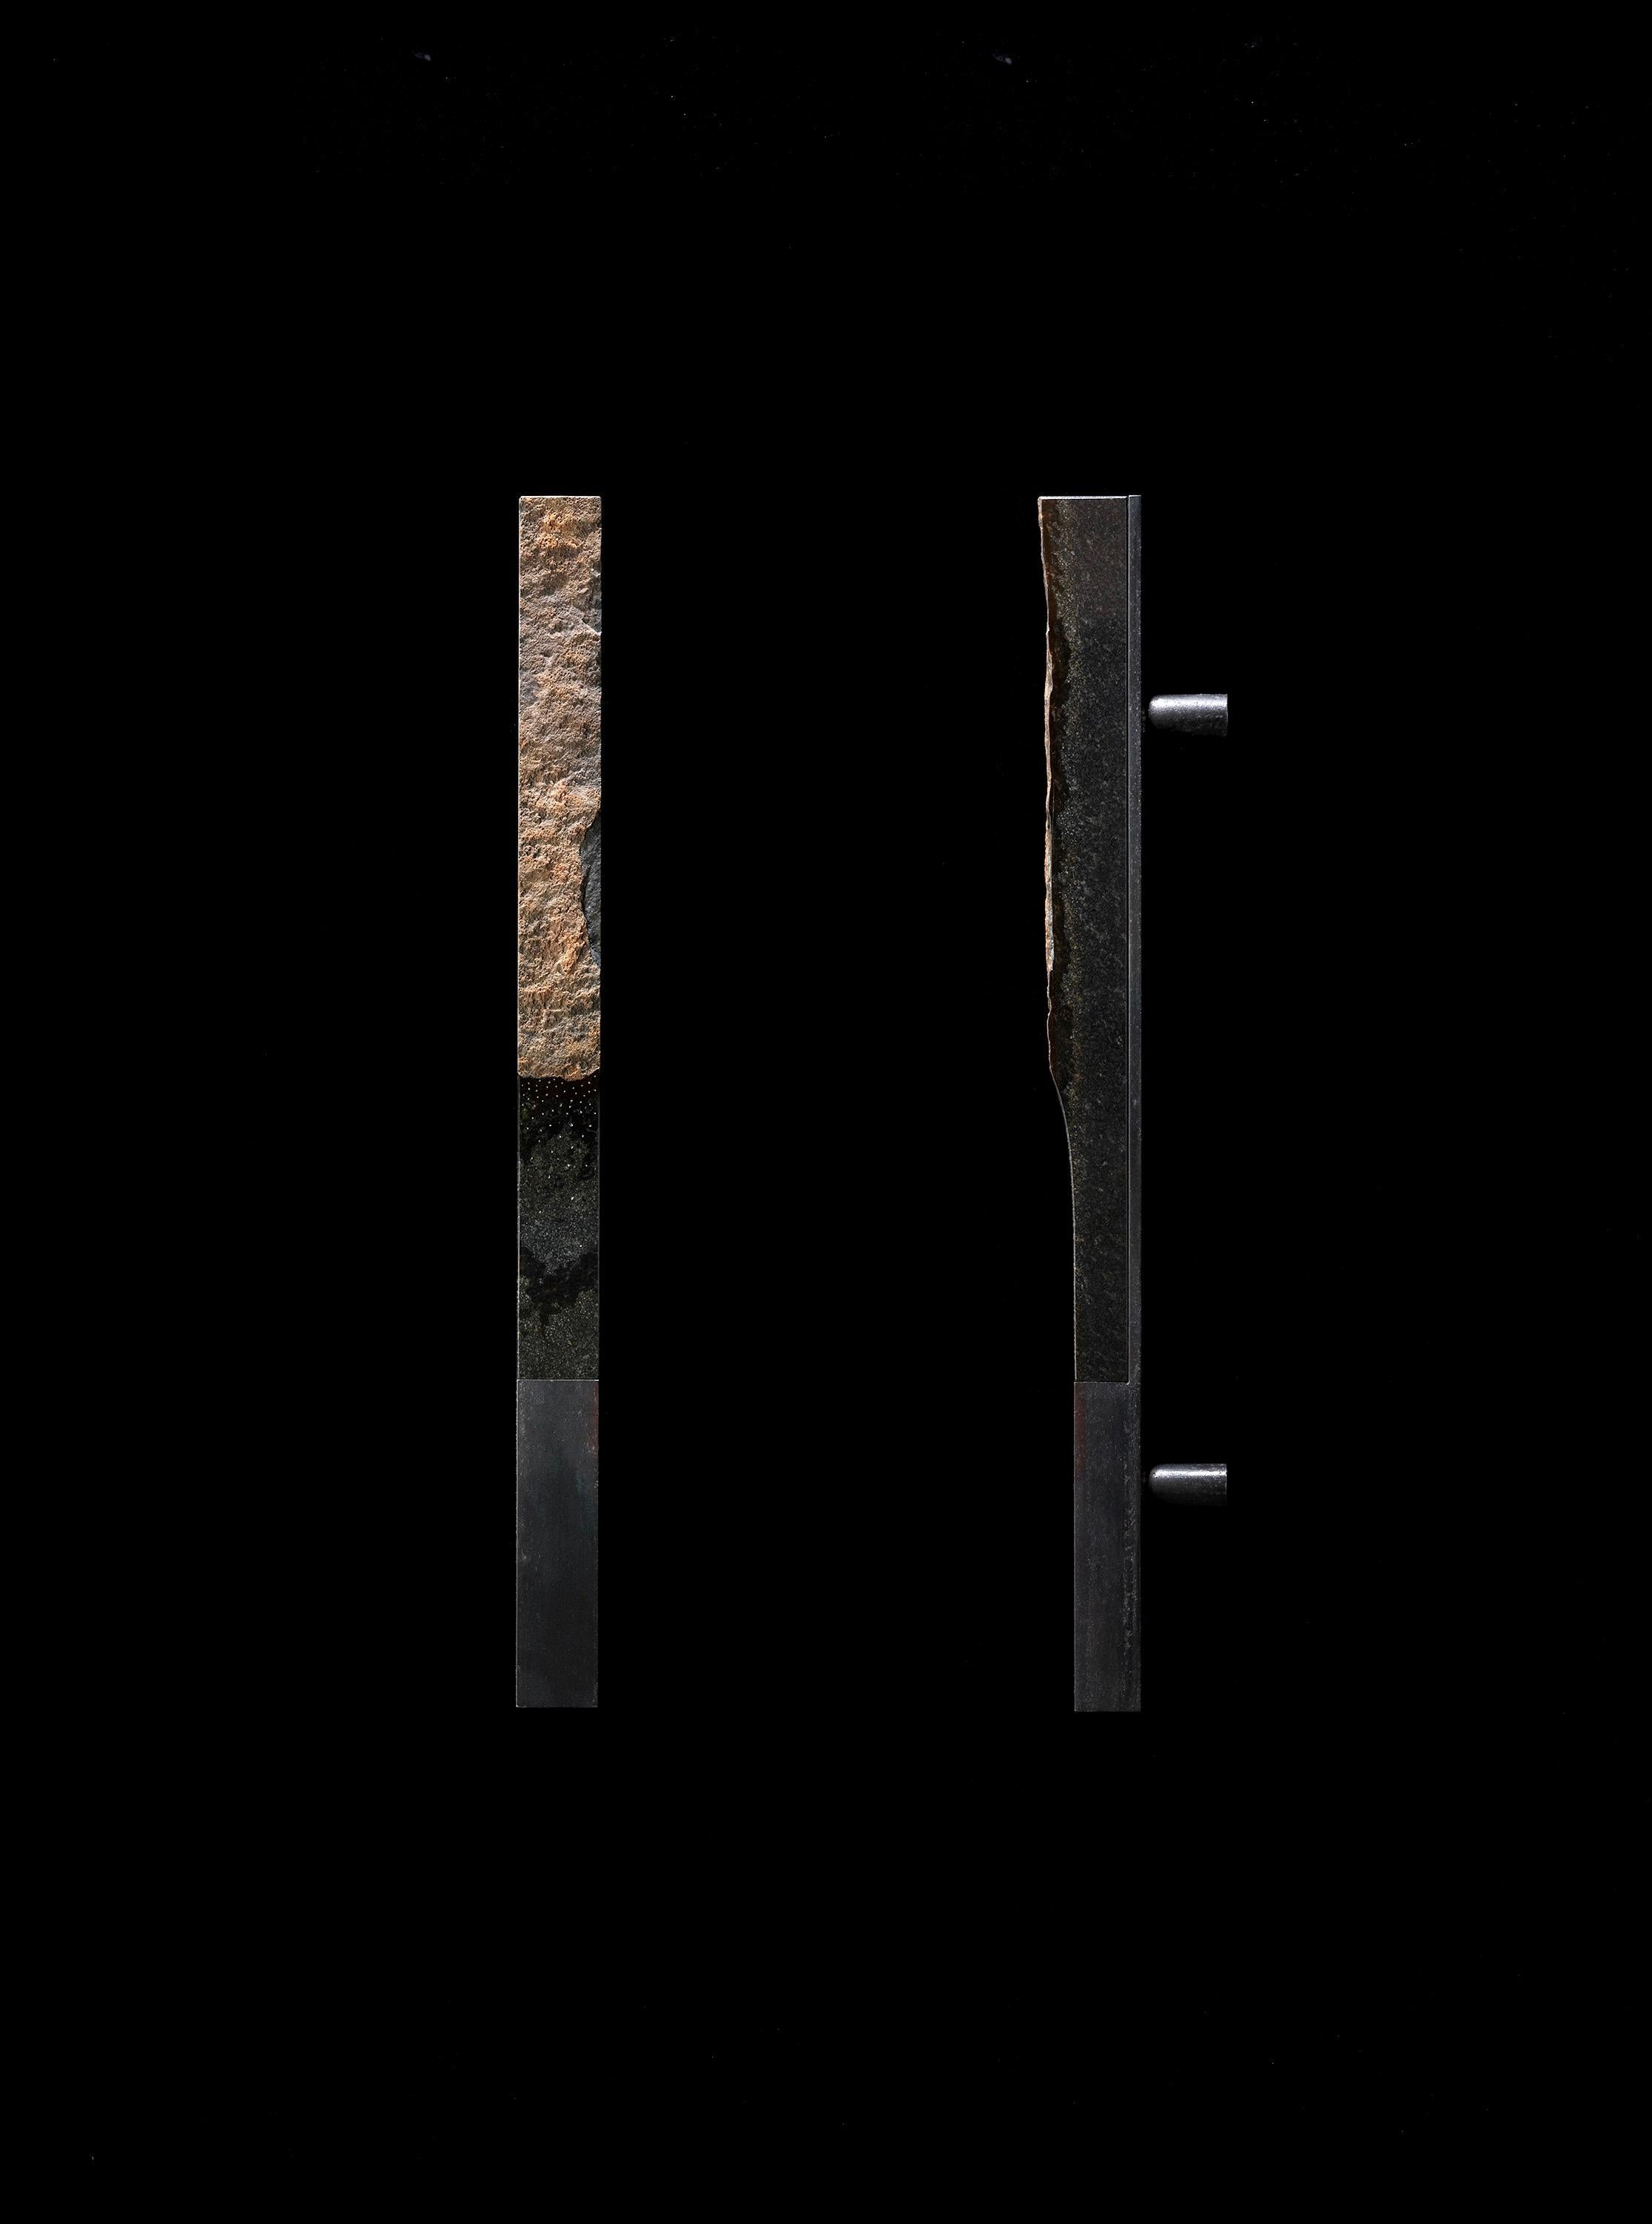 Set Of 2 T1 Sculptural Door Handles by Okurayama
One Of A Kind.
Dimensions: D 8,6 x W 4 x H 55 cm. 
Materials: Daté Kan Stone and iron.

The Daté Kan Stone is a rare stone that exist only in a few mountains in Japan.

The defining characteristic